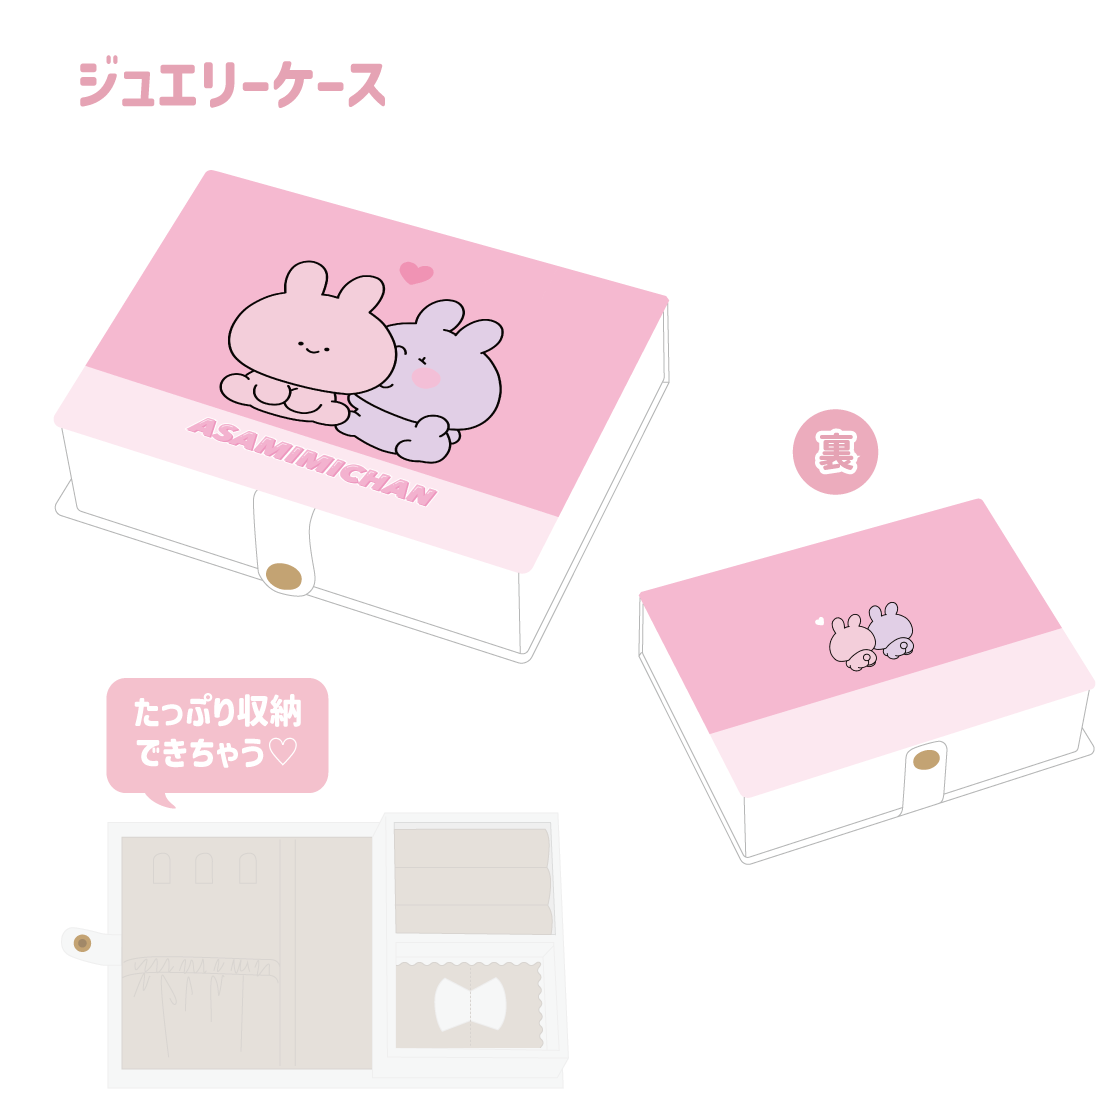 [Asamimi-chan] Jewelry case (Asamimi BASIC AUGUST) [Shipped in mid-October]